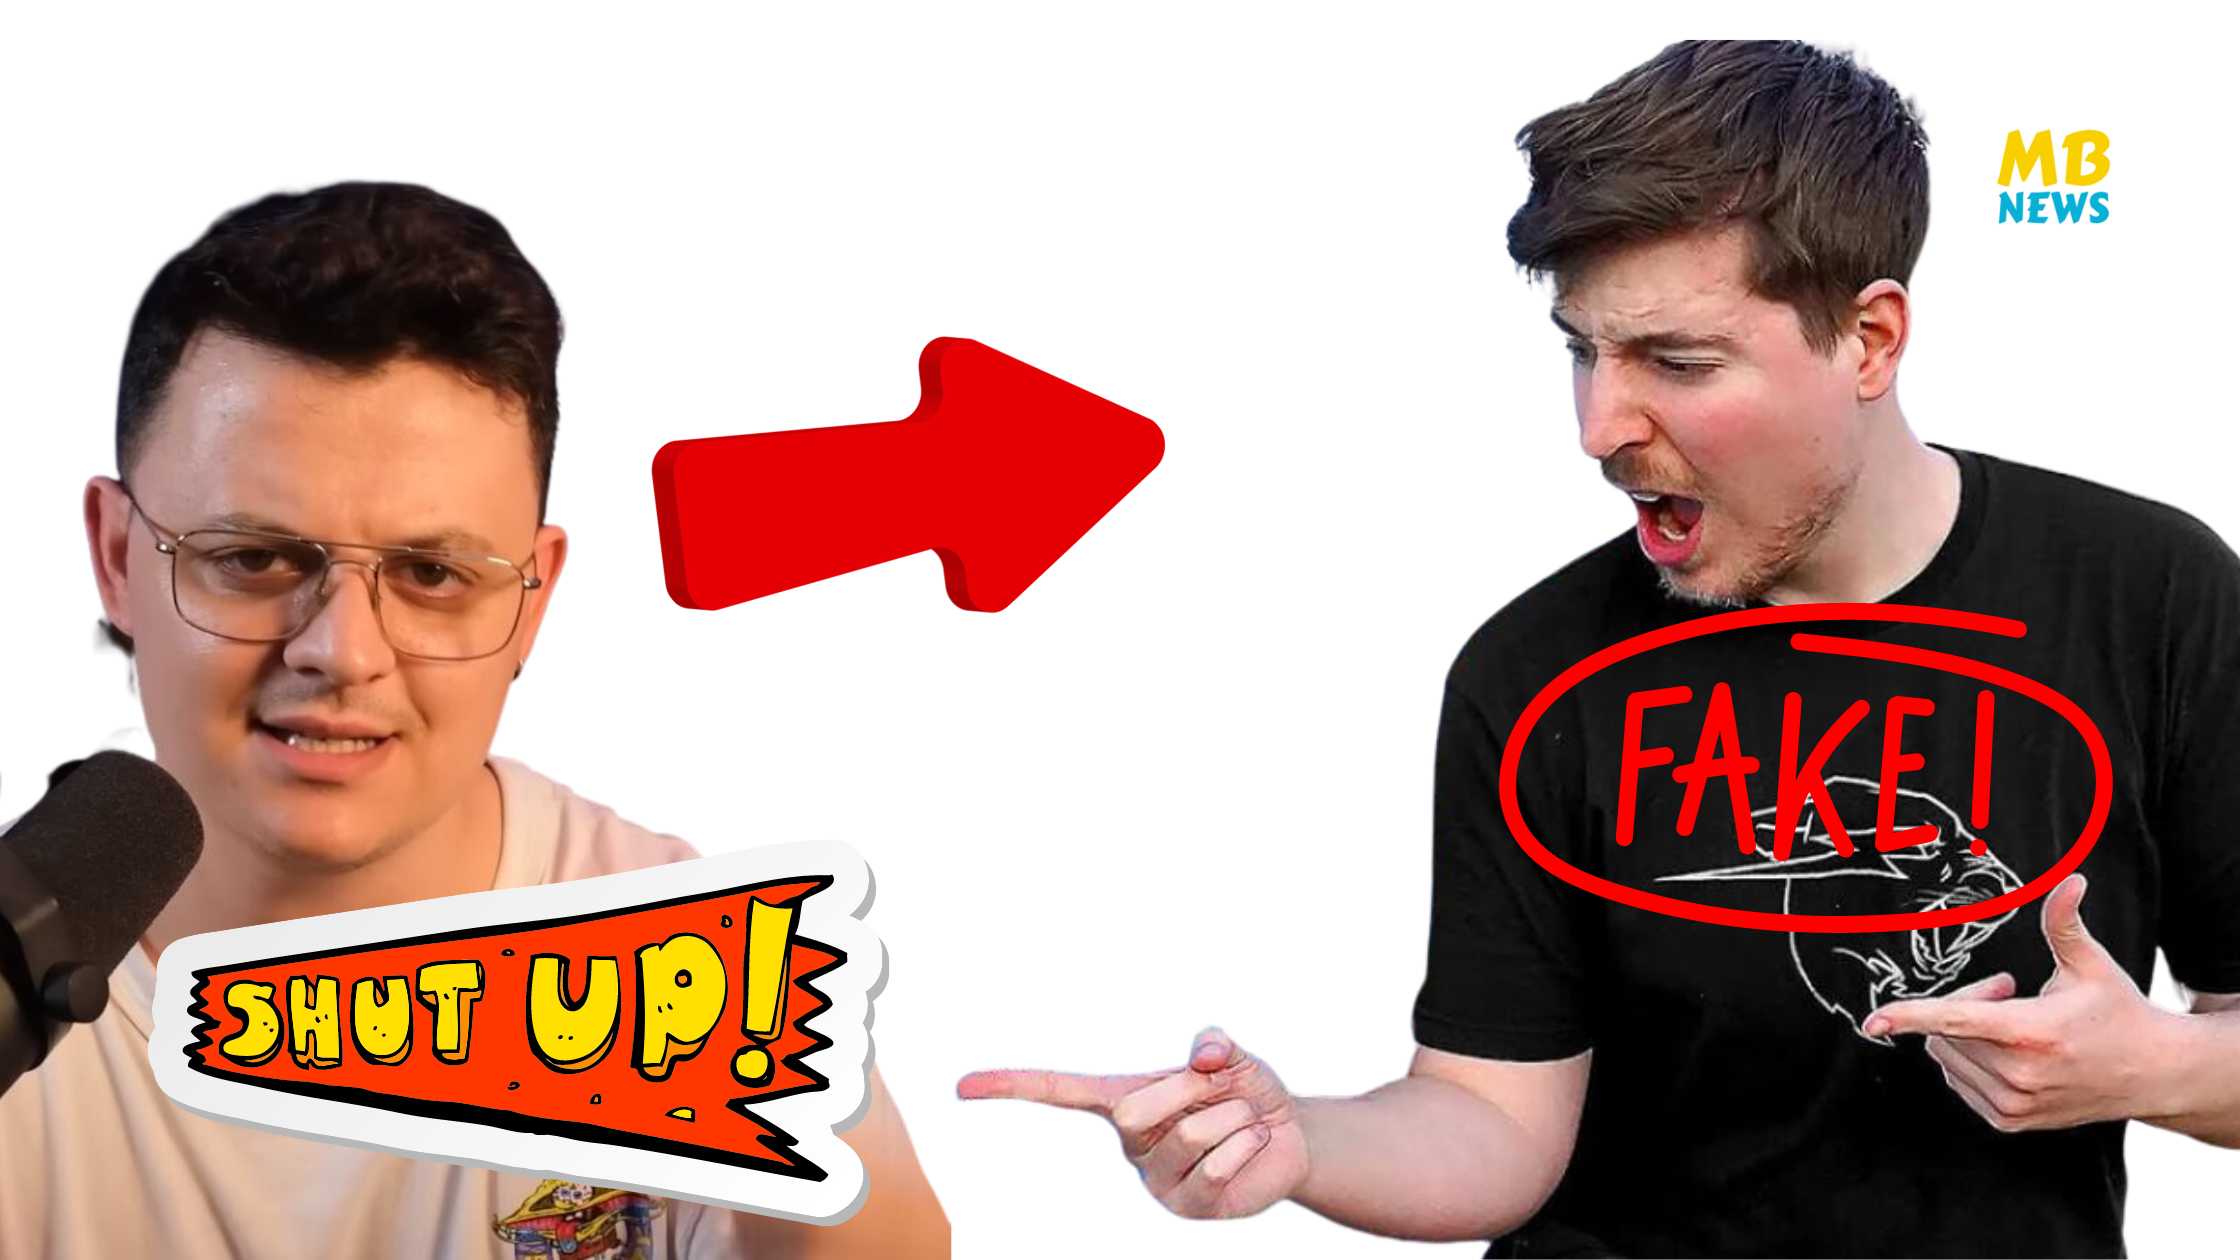 Debunking the Myth: Addressing Claims of CGI and Fakery in MrBeast's Latest Video